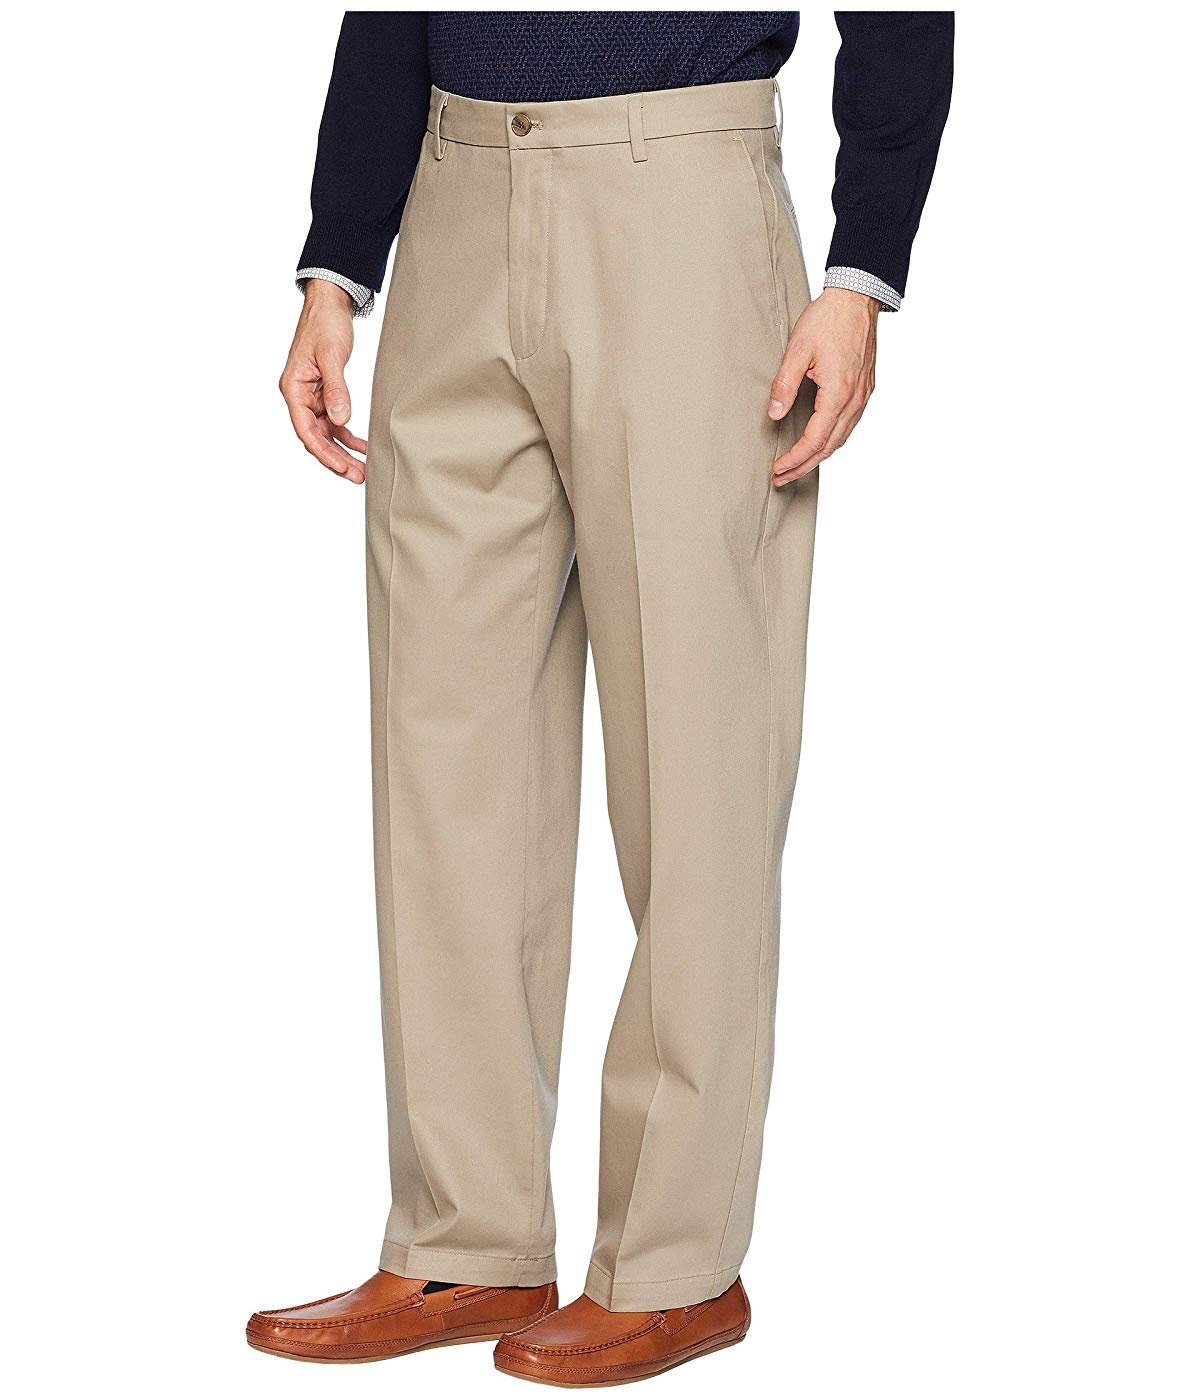 Dockers Men's Relaxed Fit Signature Khaki Lux Cotton Stretch Pants - image 3 of 3